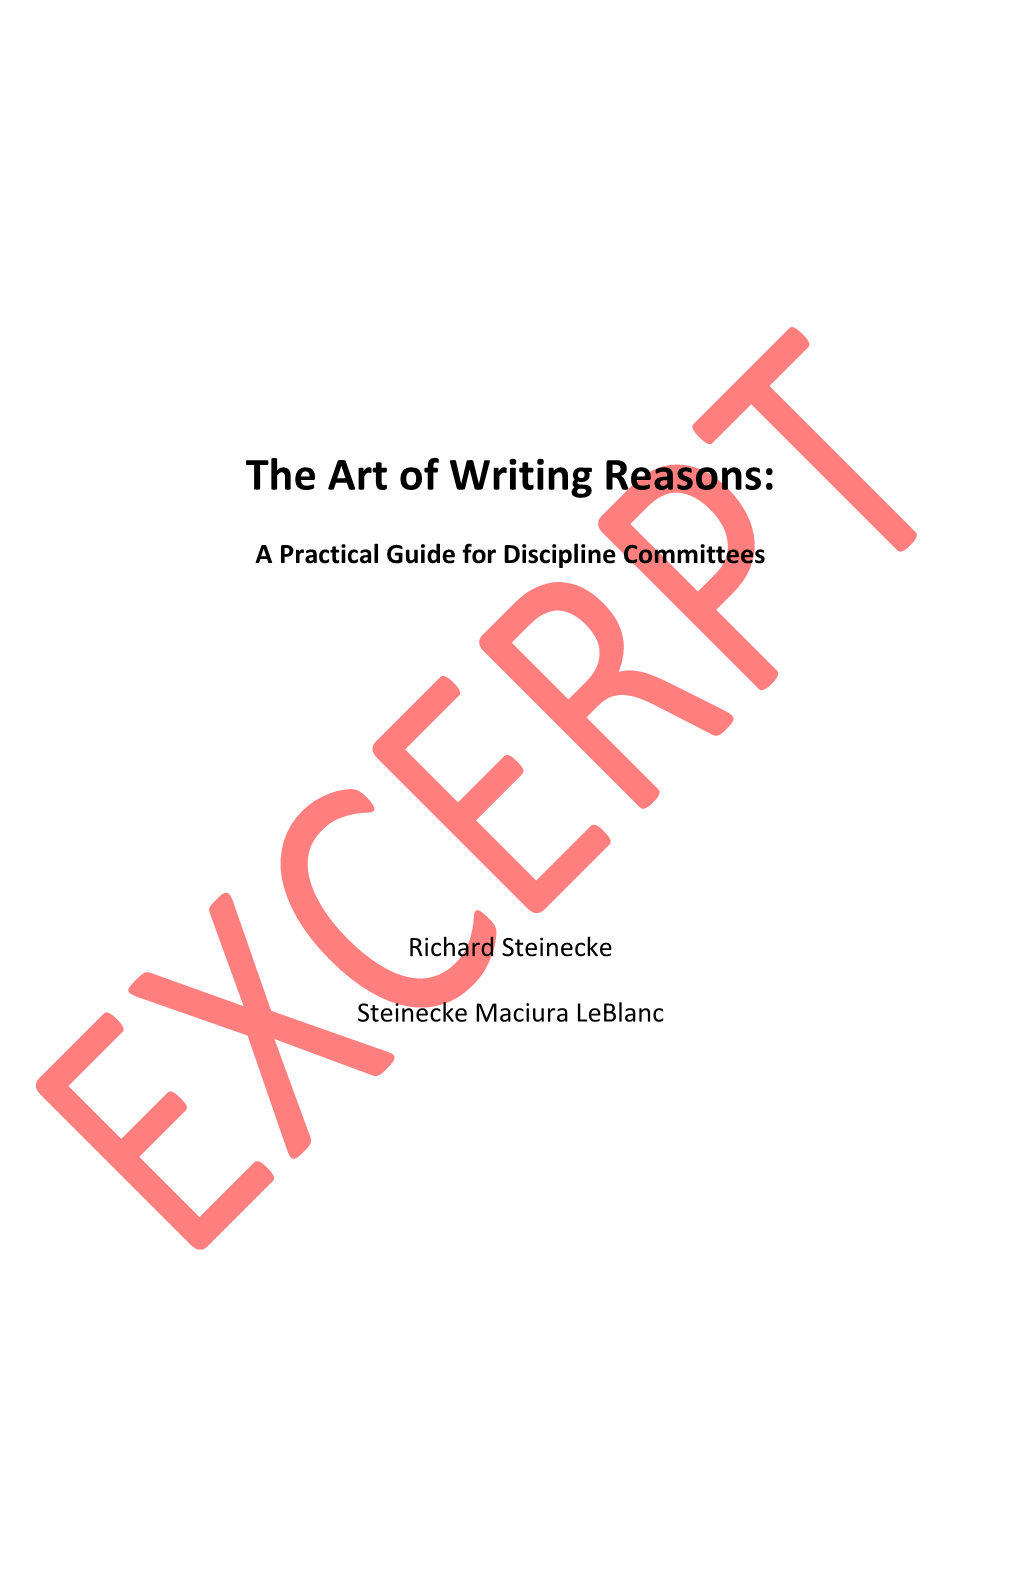 The Art of Writing Reasons